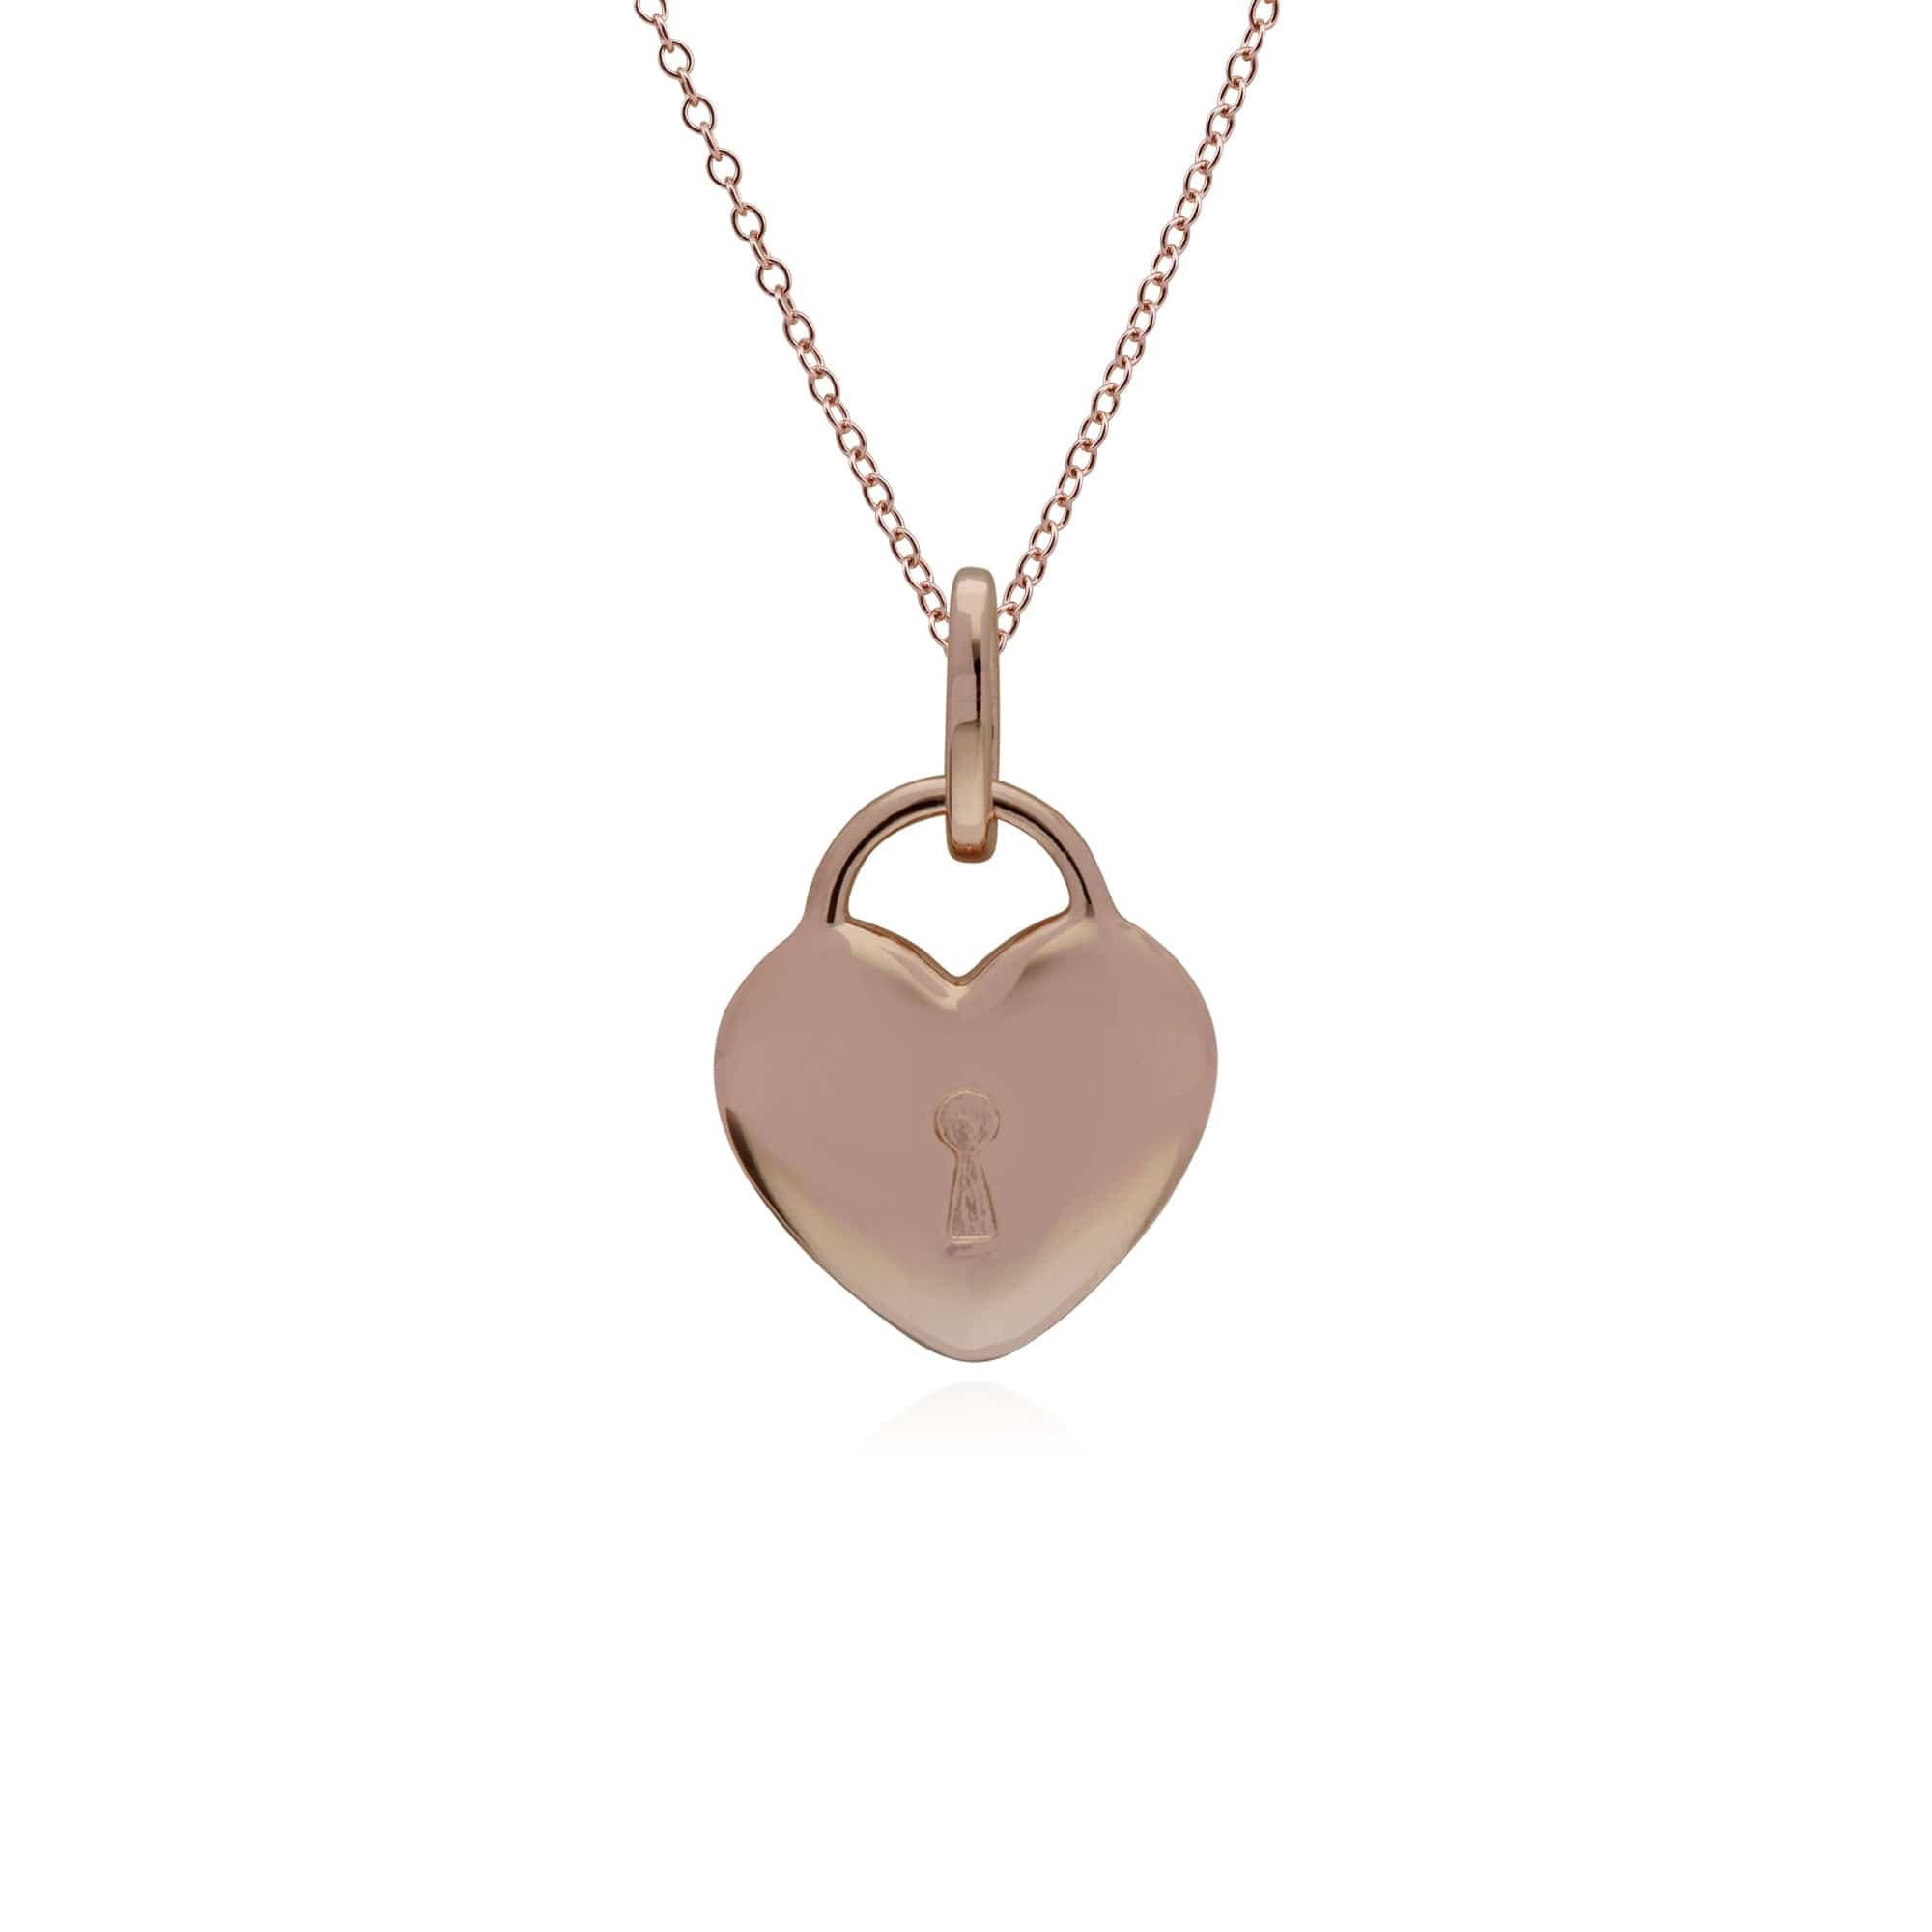 270P026310925-270P026901925 Classic Heart Lock Pendant & Clear Topaz Key Charm in Rose Gold Plated 925 Sterling Silver 3